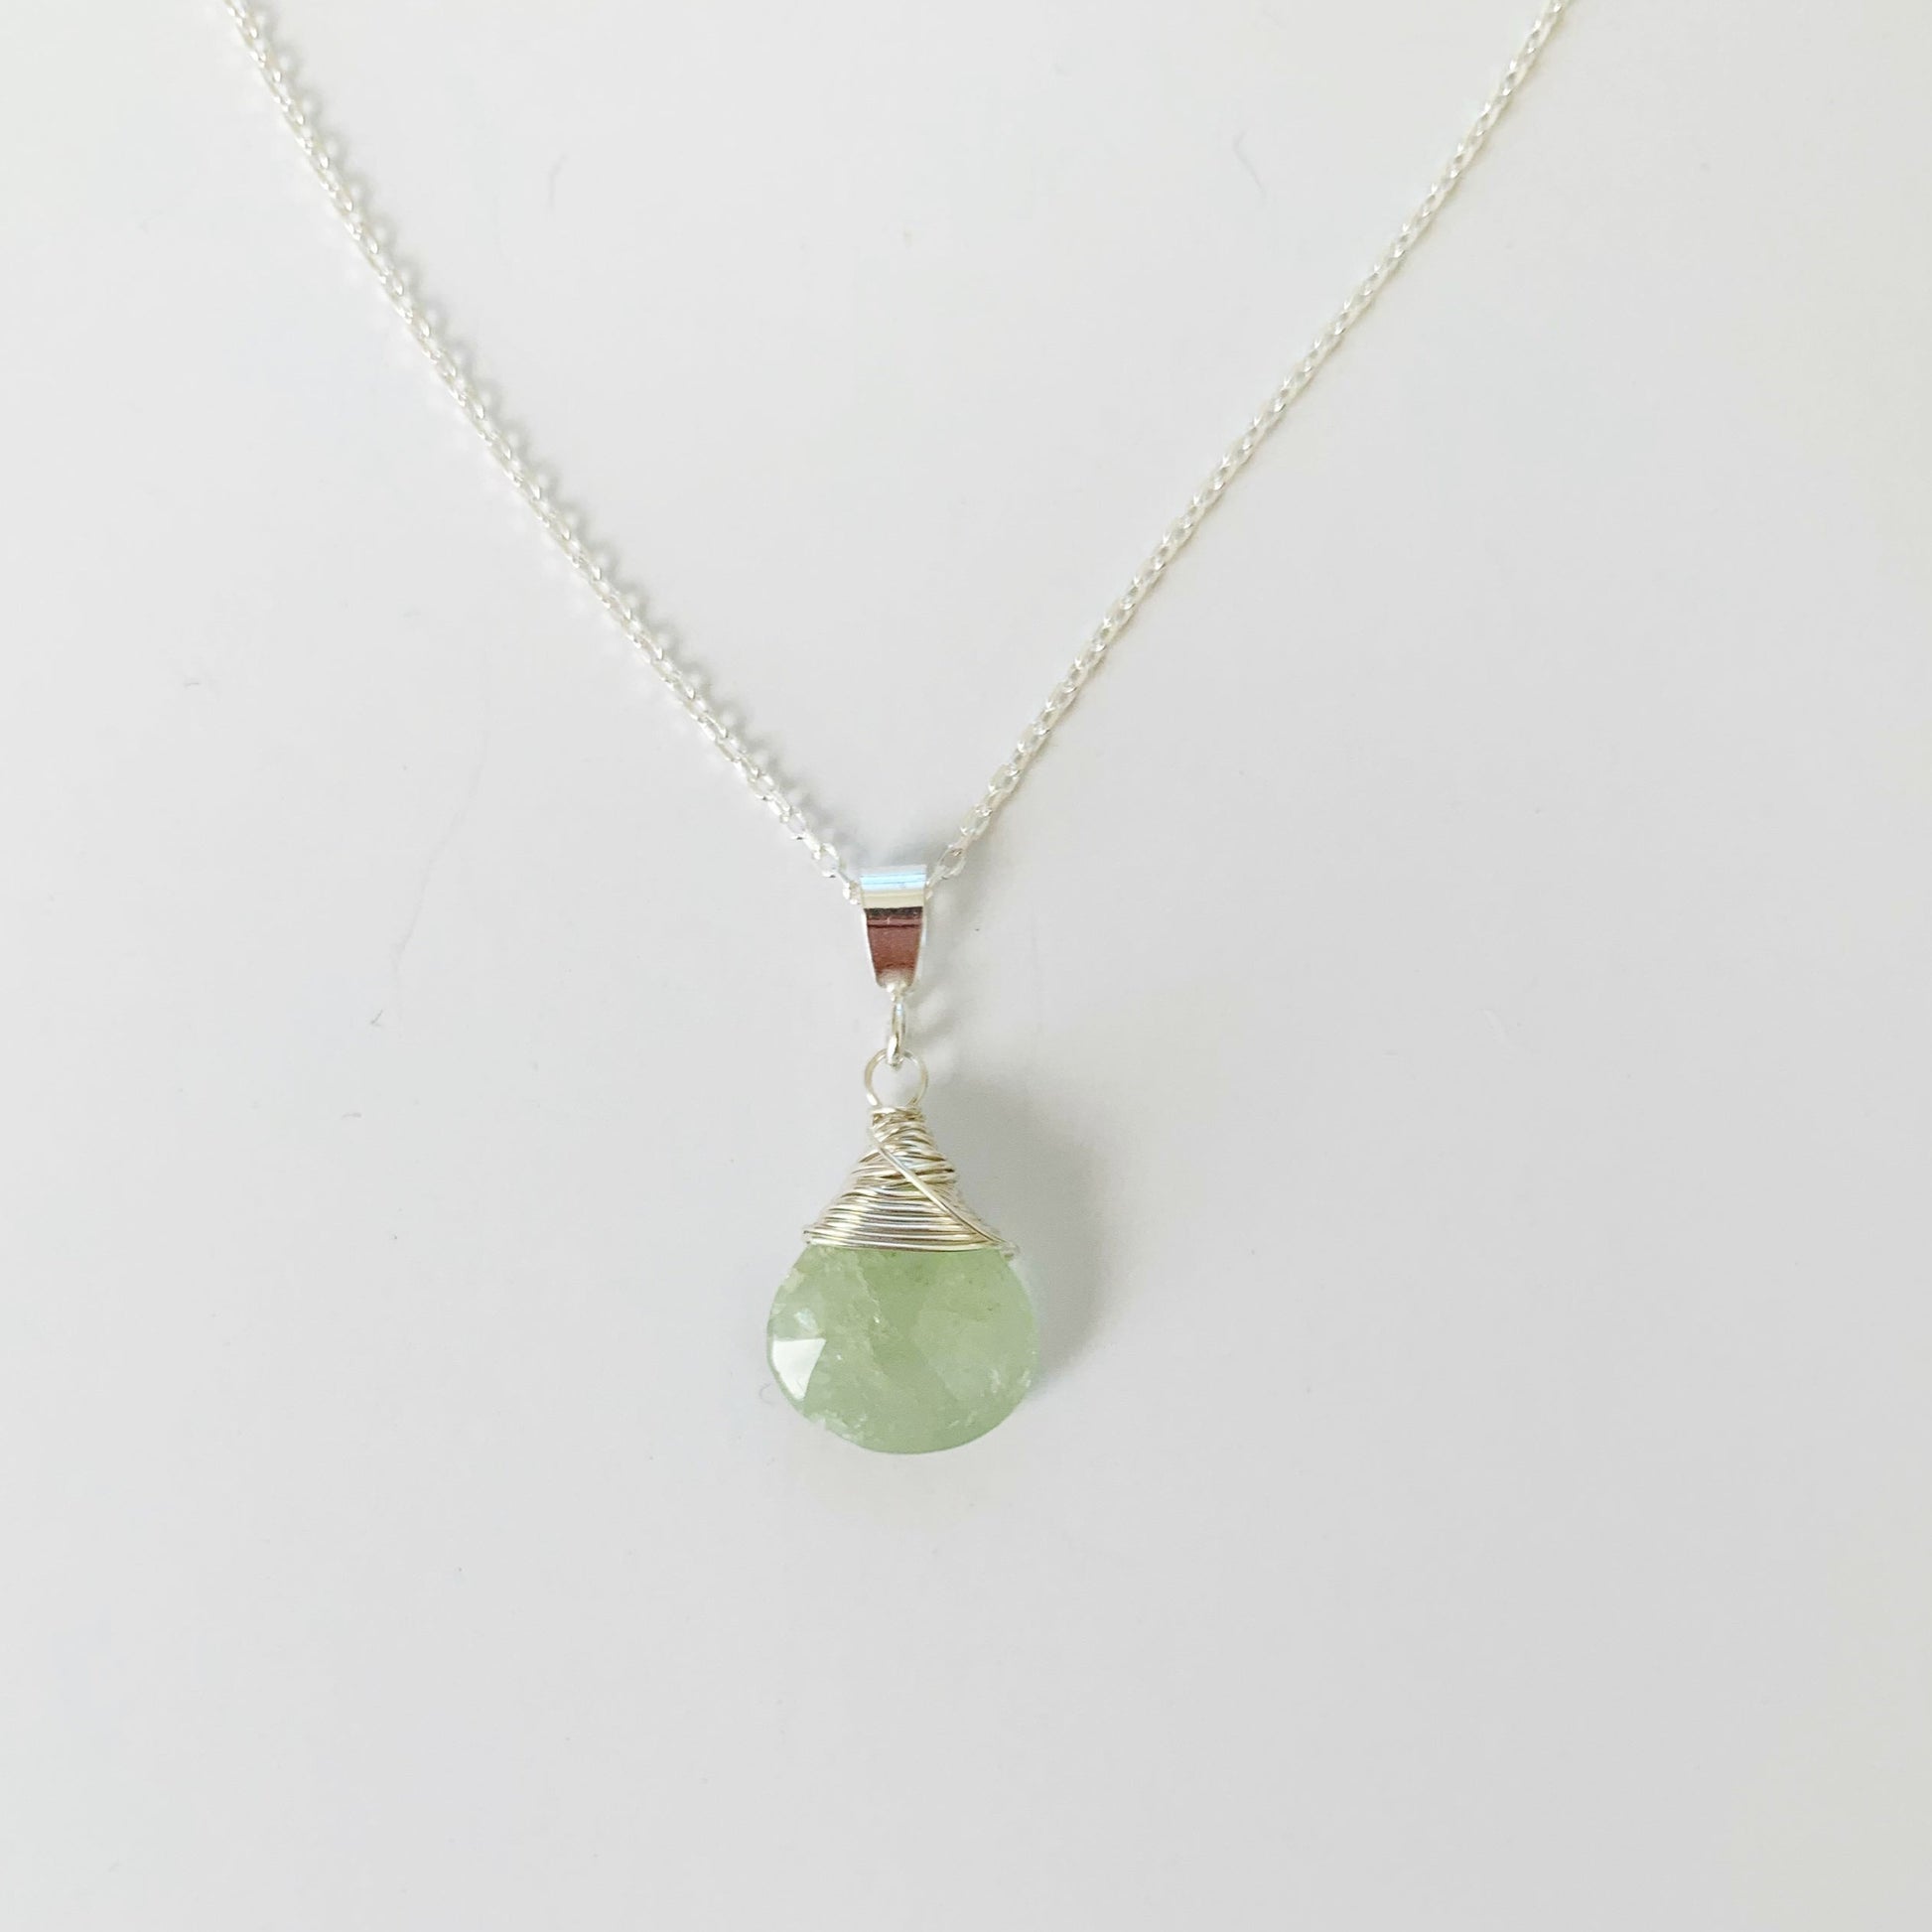 Raindrop necklace by mermaids and madeleines is a sterling silver wire wrapped pendant necklace with aquamarine. this necklace is photographed on a white surface